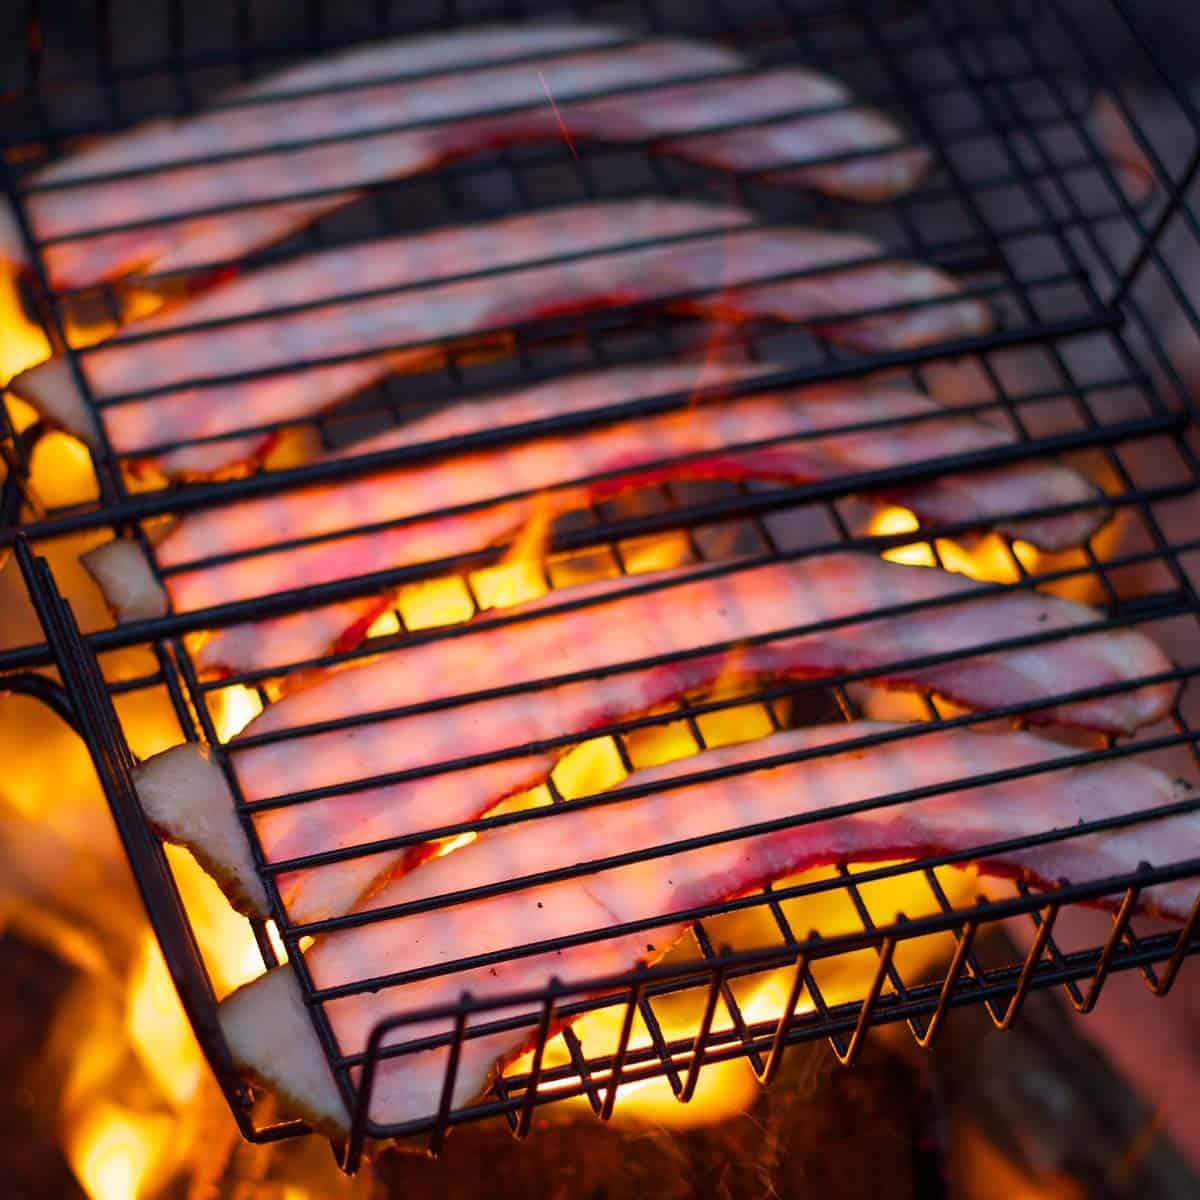 5 strips of thick cut bacon being grilled over an open flame. 